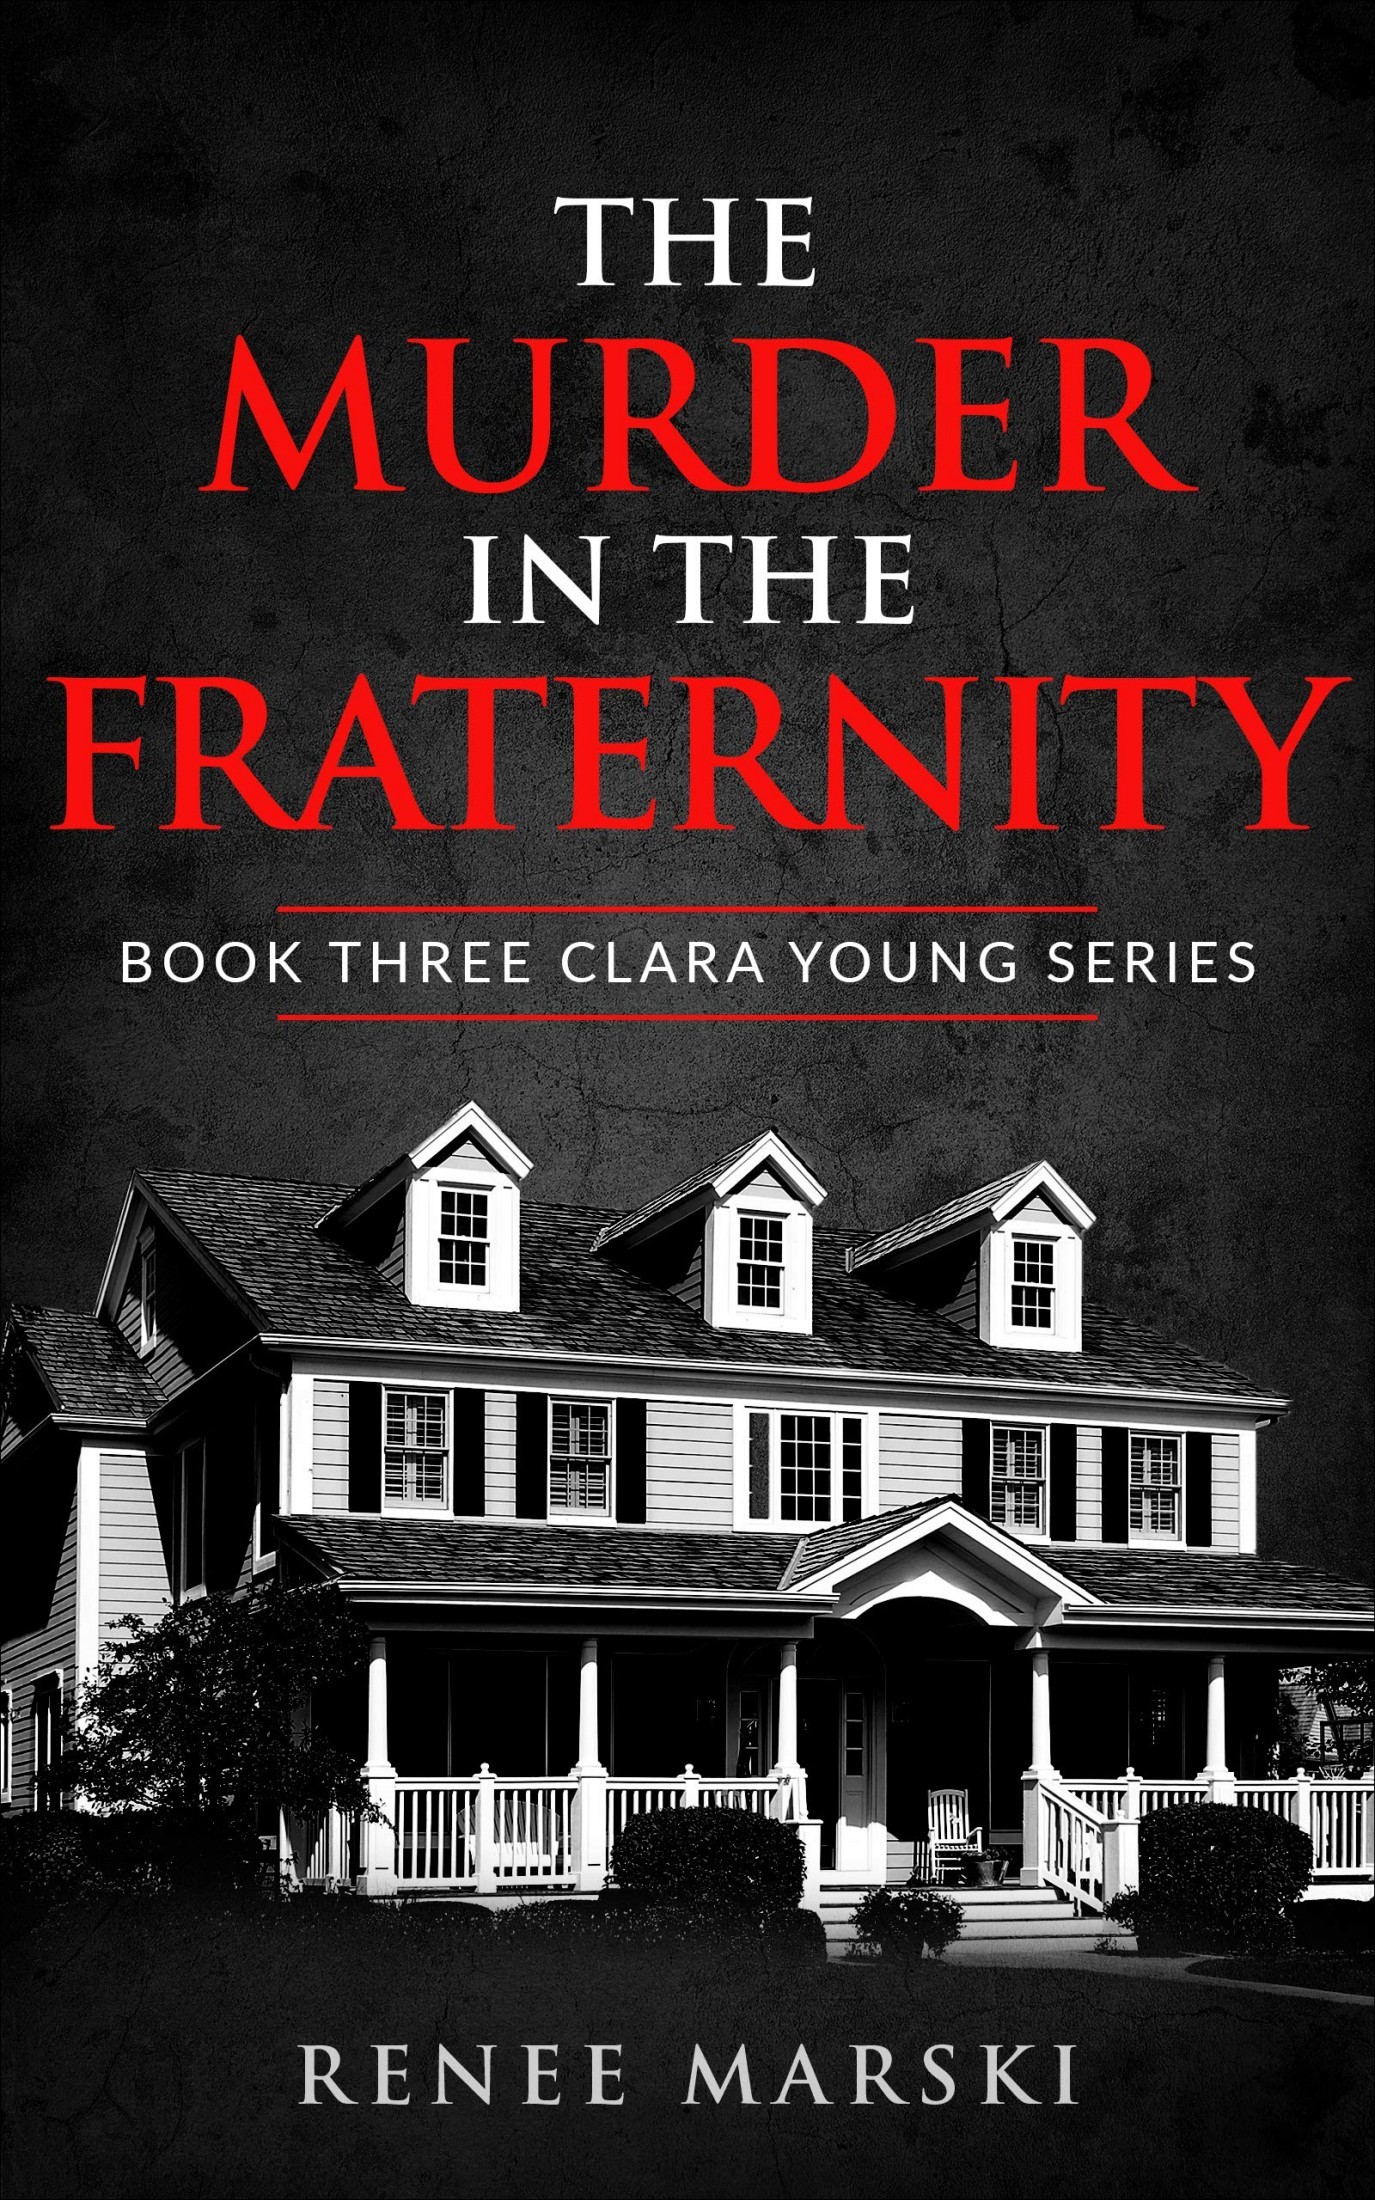 The Murder in the Fraternity